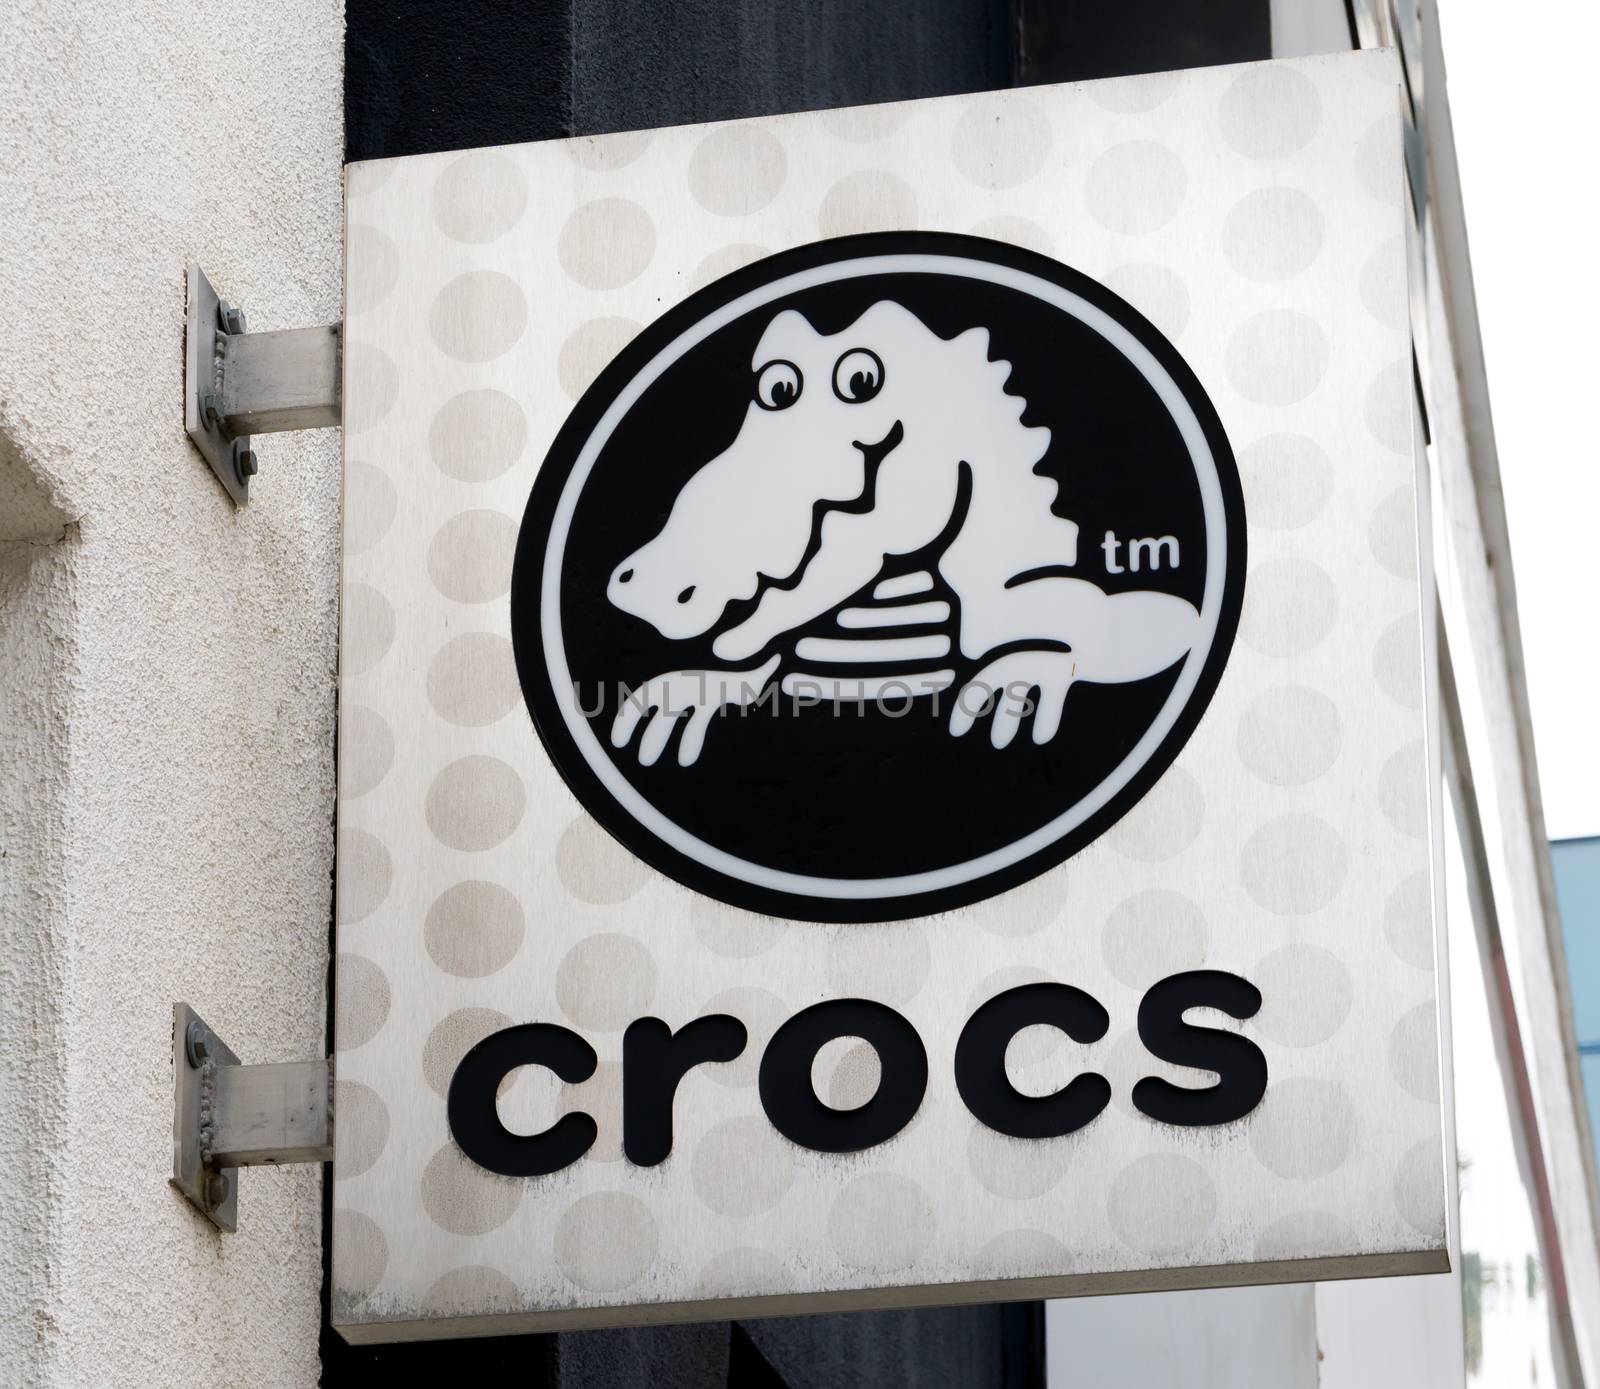 SANTA MONICA, CA/USA - MAY 12, 2016: Crocs sign and logo. Crocs, Inc. is a shoe manufacturer that produces and distribute foam clog footwear.